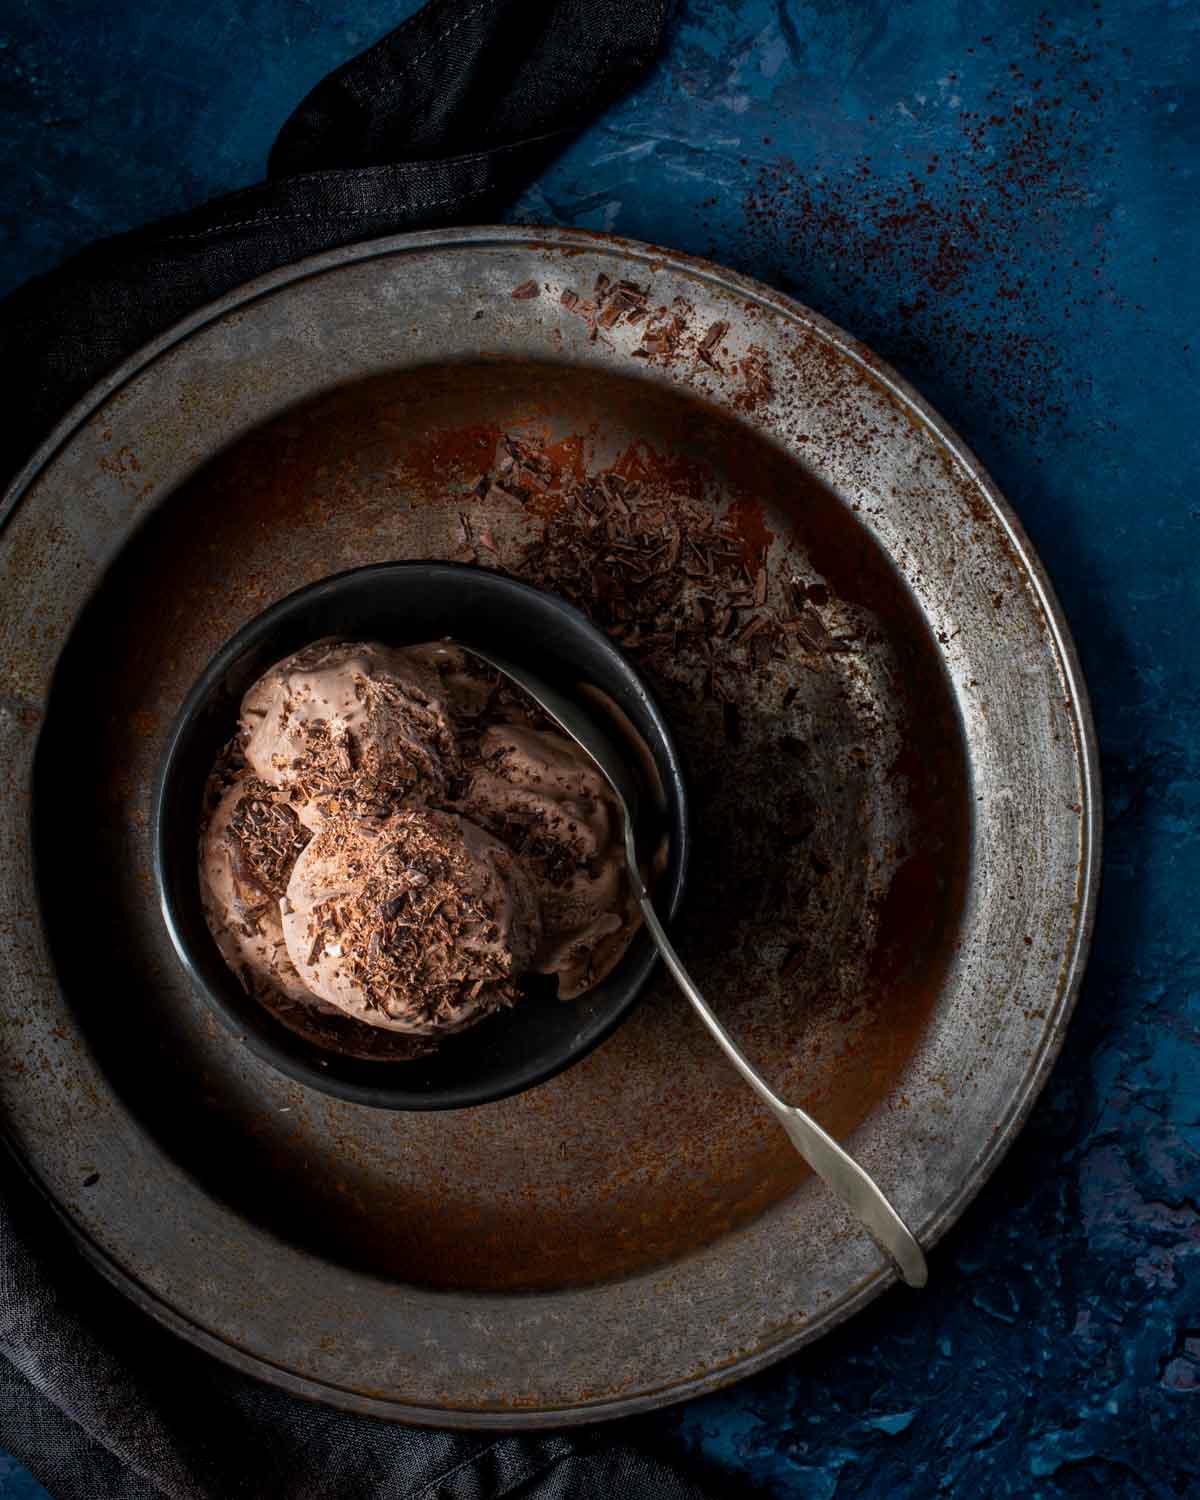 <p>Buckle up for an indulgently rich, creamy, and intensely dark chocolate ice cream experience! Laughably easy to make, doesn't require an ice cream maker and you only need four ingredients.</p> <p><strong>Go to the recipe</strong>: <strong><a href="https://thecinnamonjar.com/dark-chocolate-ice-cream-no-churn/">Dark Chocolate Ice Cream</a></strong></p>